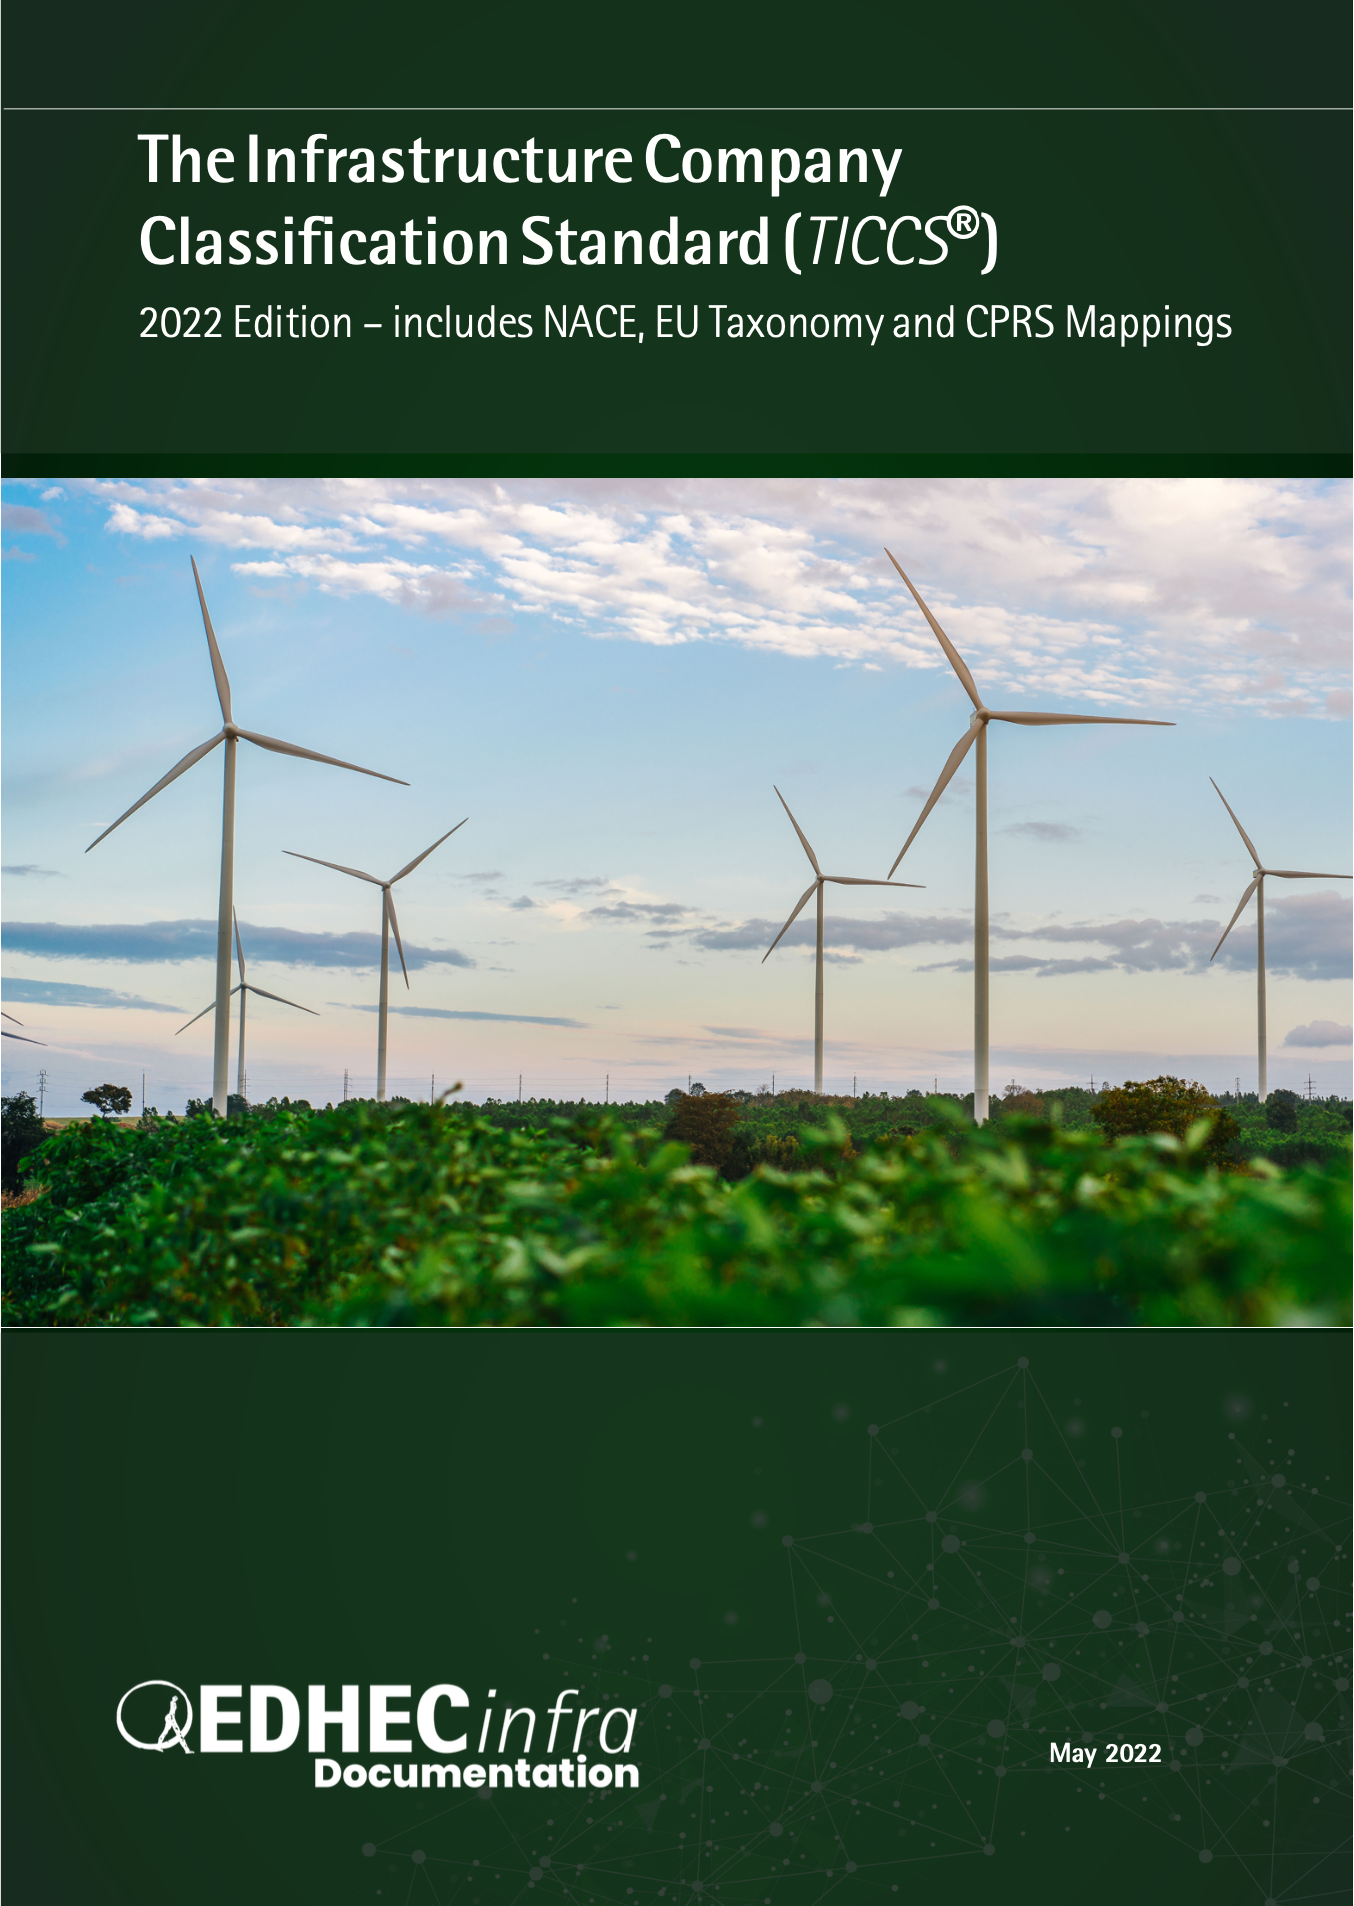 The 2022 edition of TICCS® now includes sustainability mappings and hydrogen assets